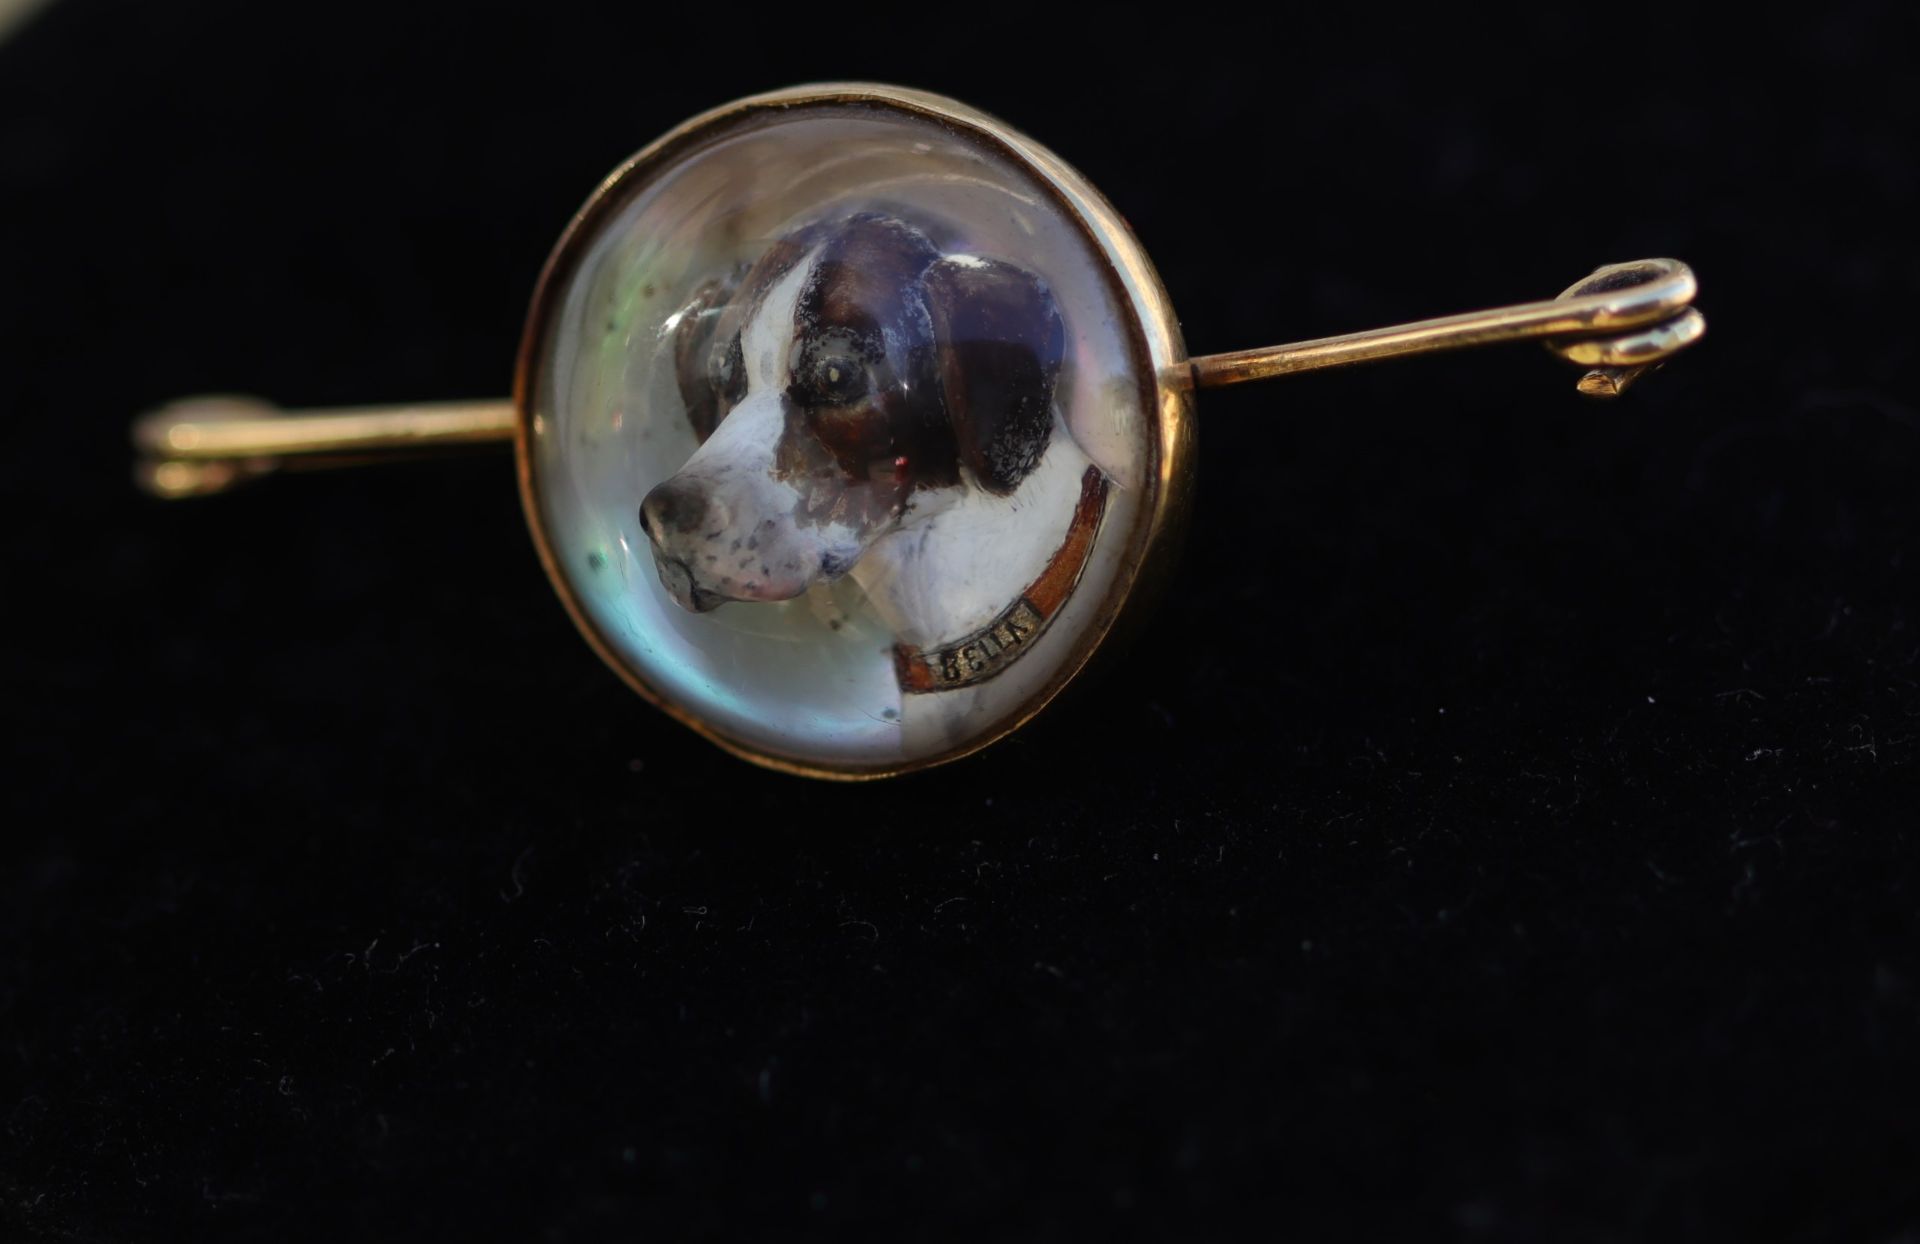 Edwardian brooch in 18K gold with Essex crystal - Image 3 of 3